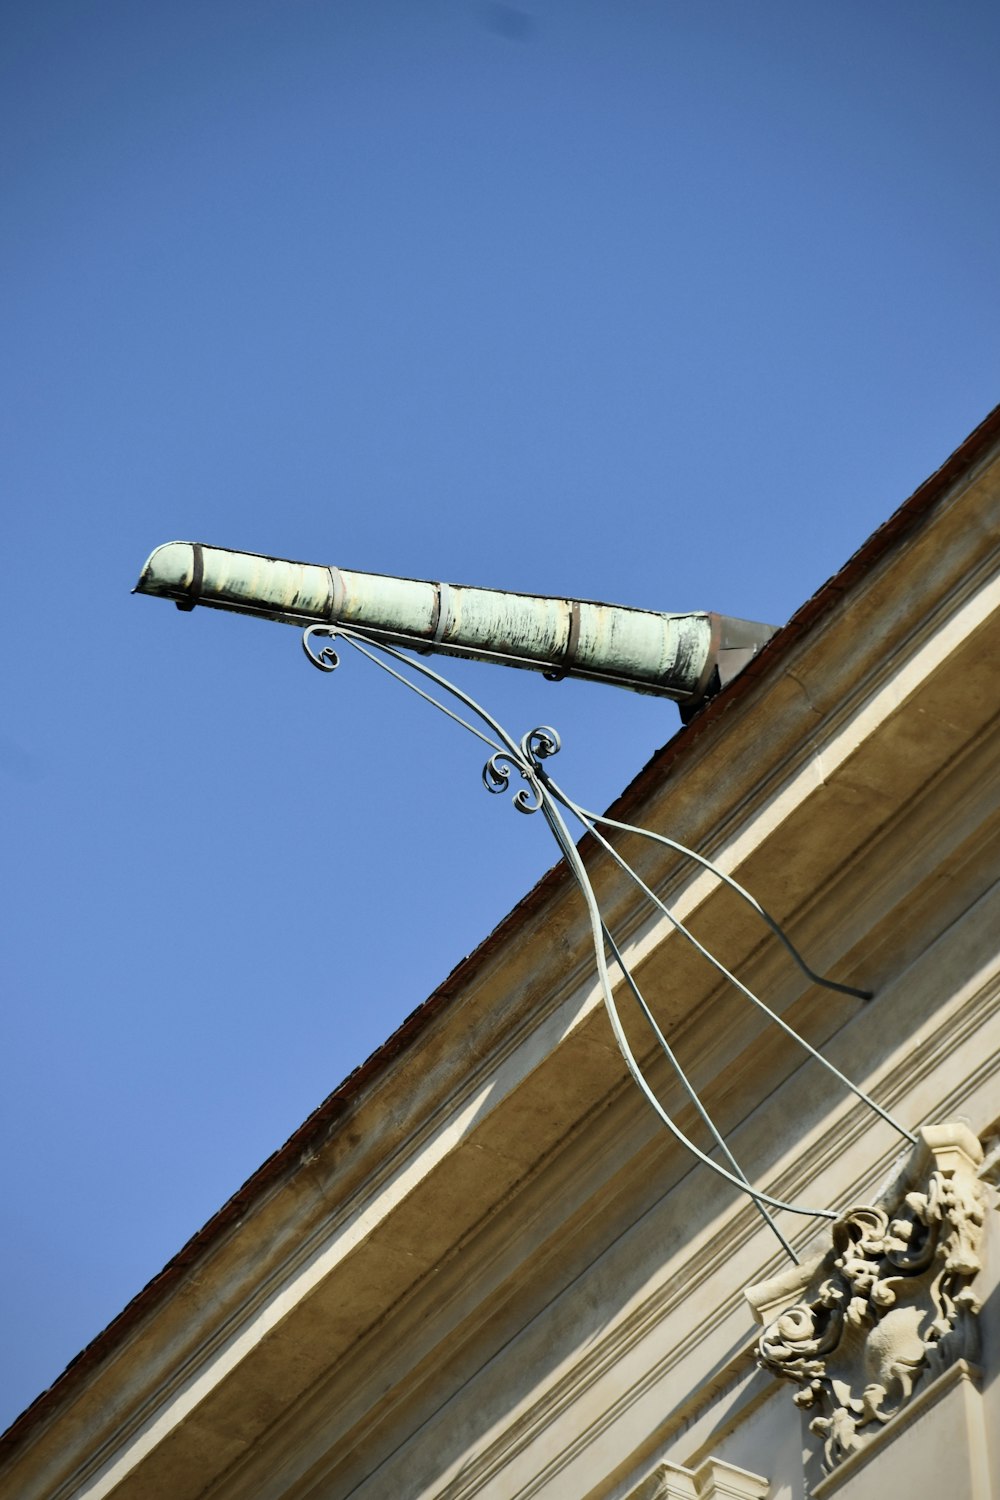 a close up of a street light on top of a building